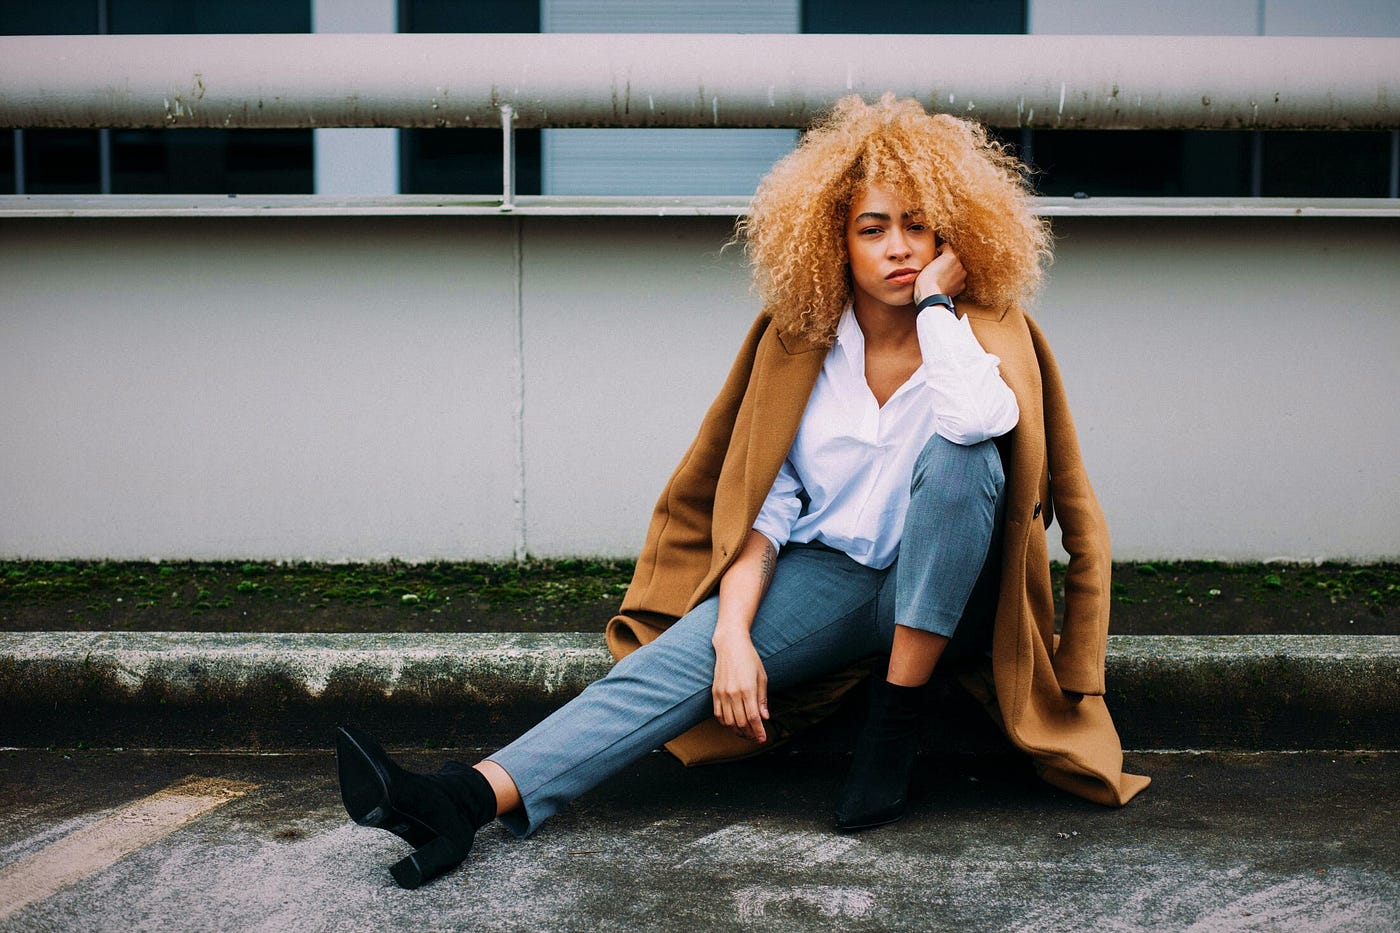 unhappy woman wearing white shirt and blue jeans sitting on concrete with hand on her cheek